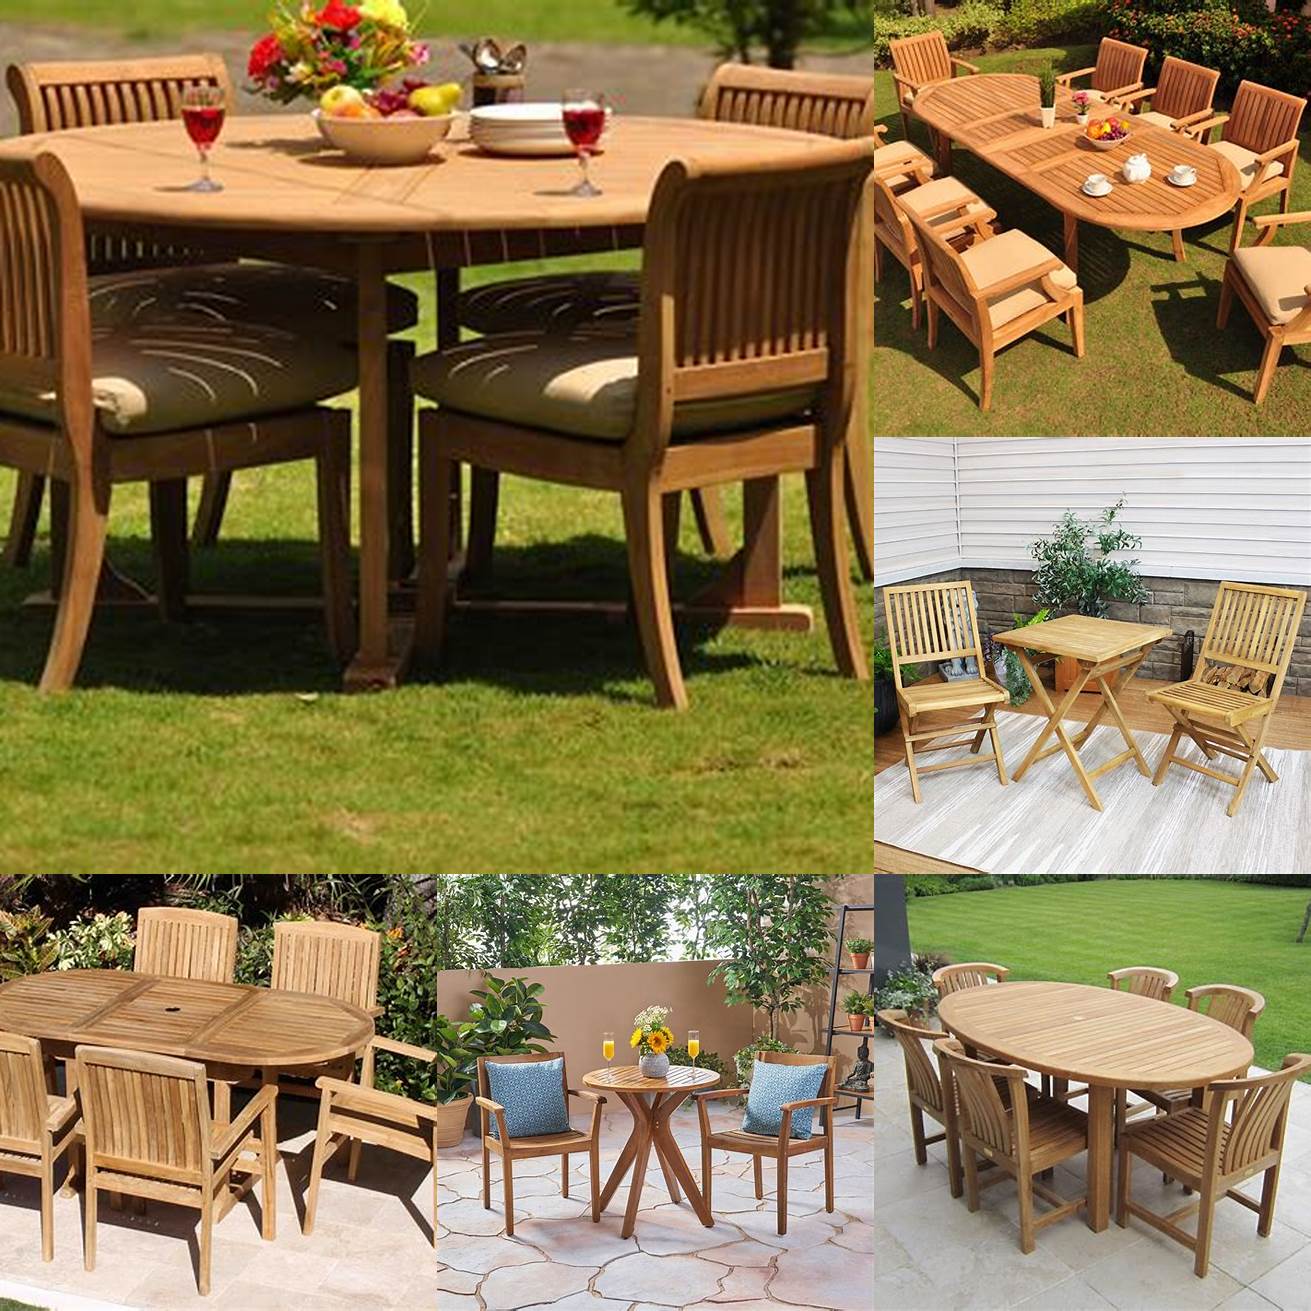 Teak Cafe Table and Chairs in a Country Setting